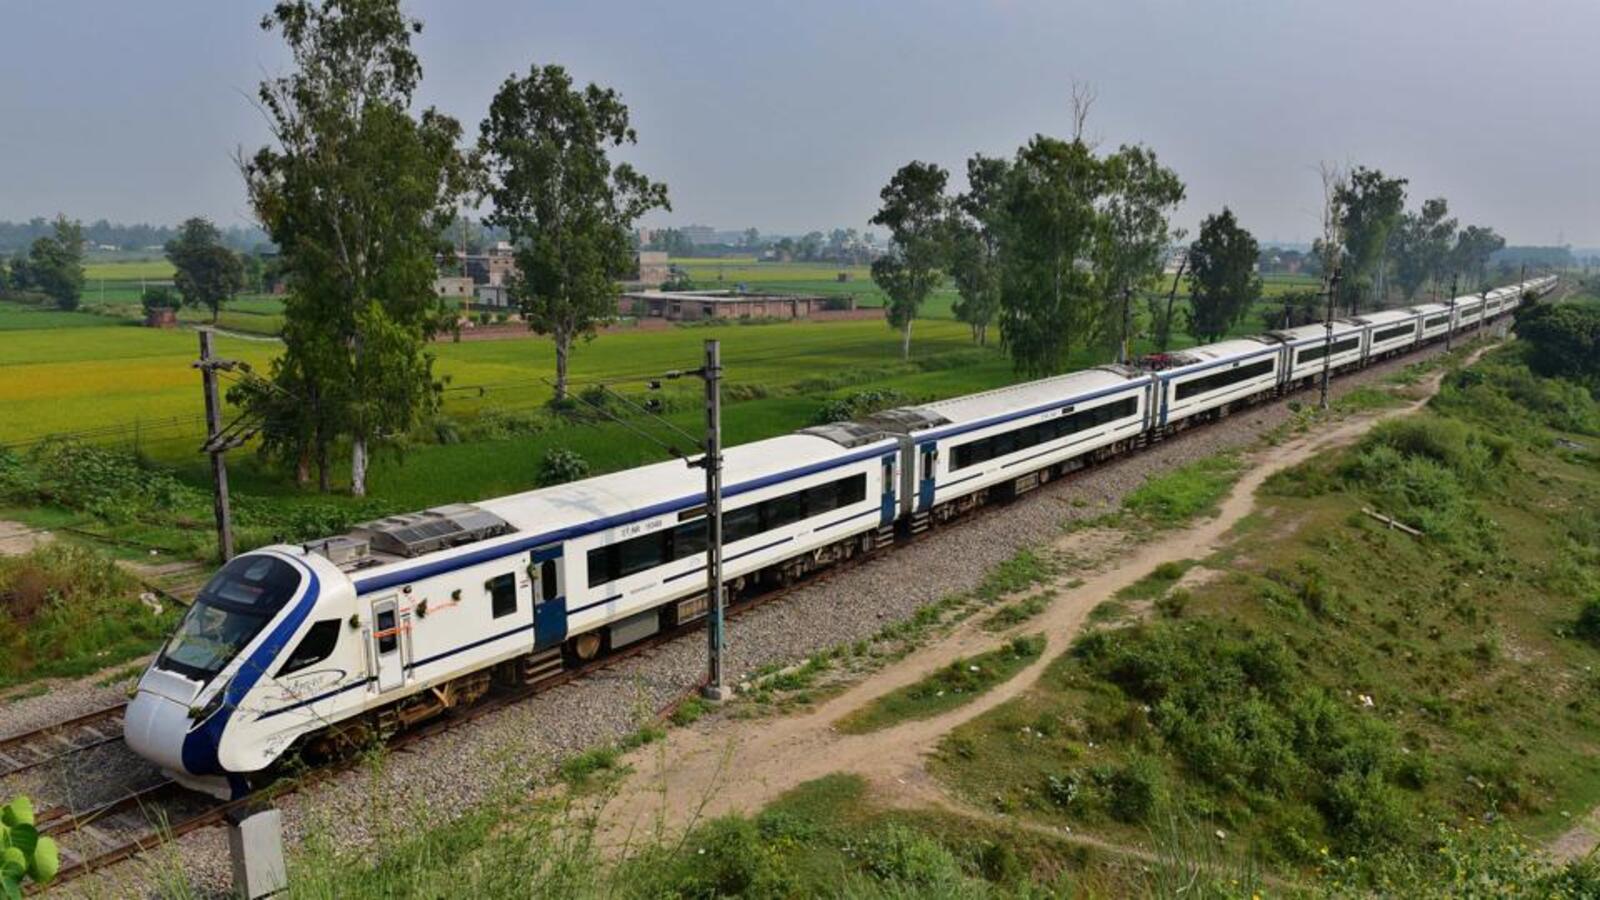 India to have 'tilting trains' by 2026 to help maintain speed on